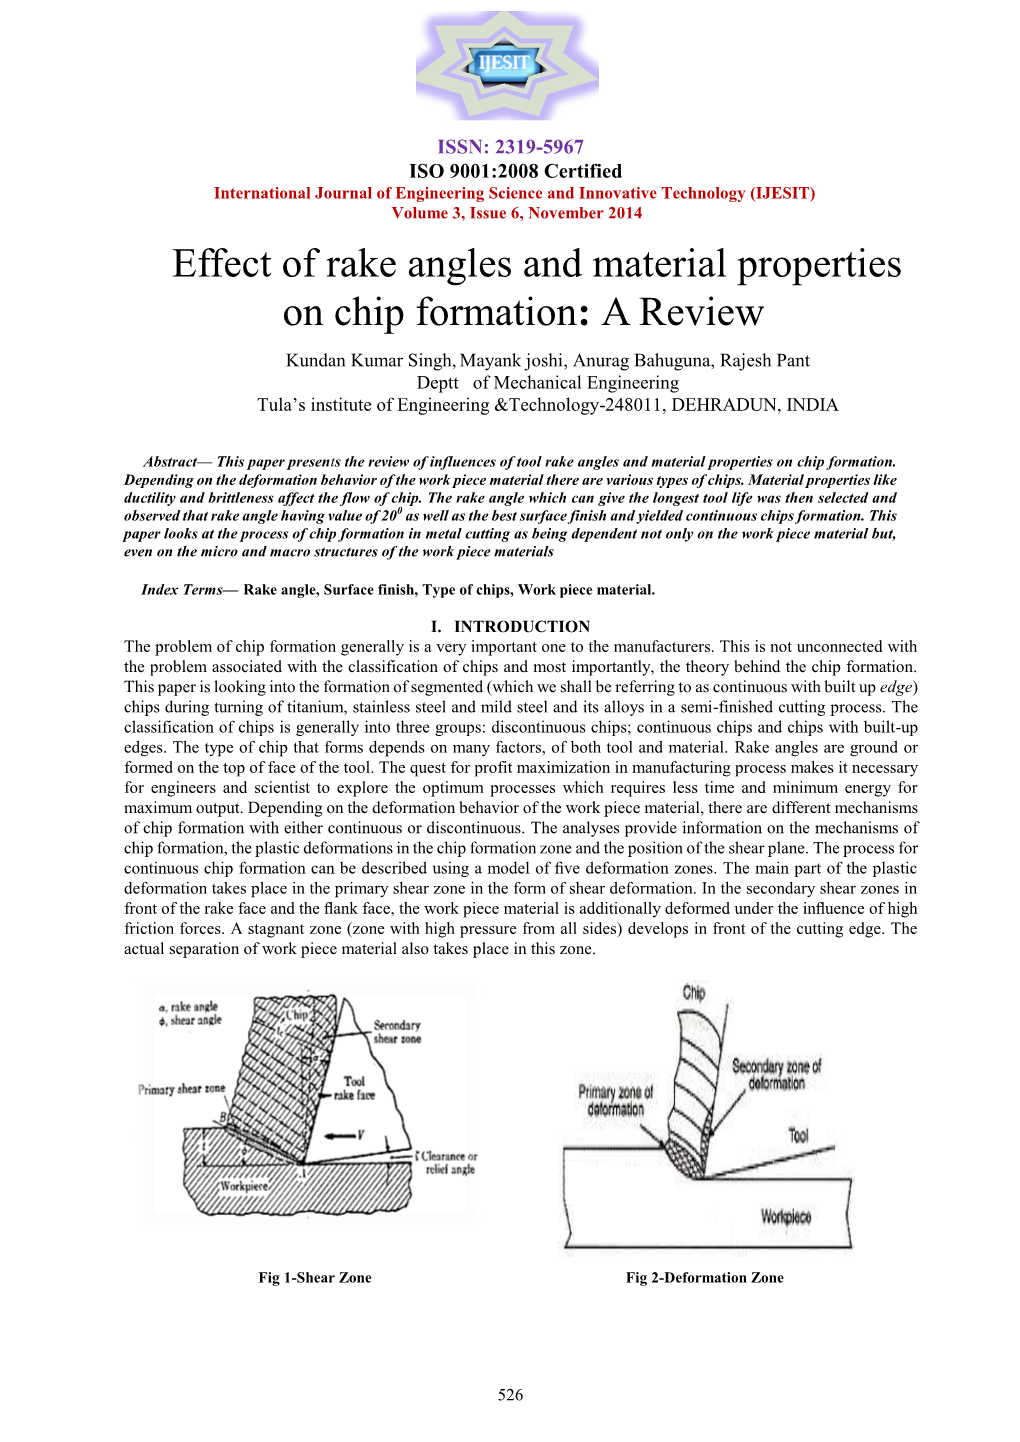 Effect of Rake Angles and Material Properties on Chip Formation